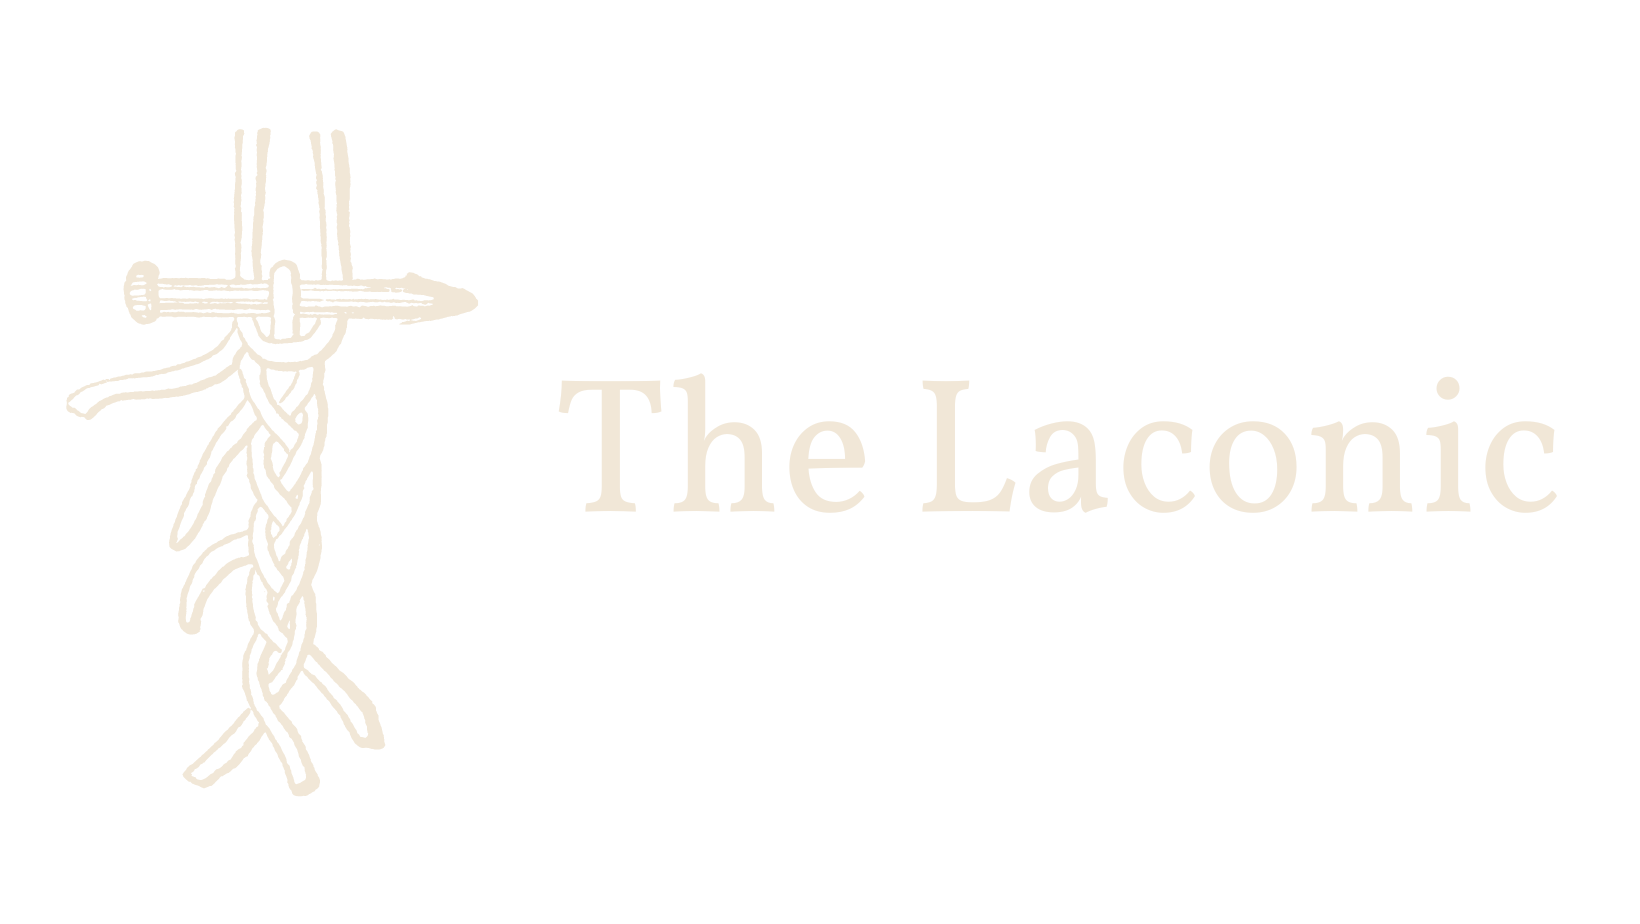 The Laconic